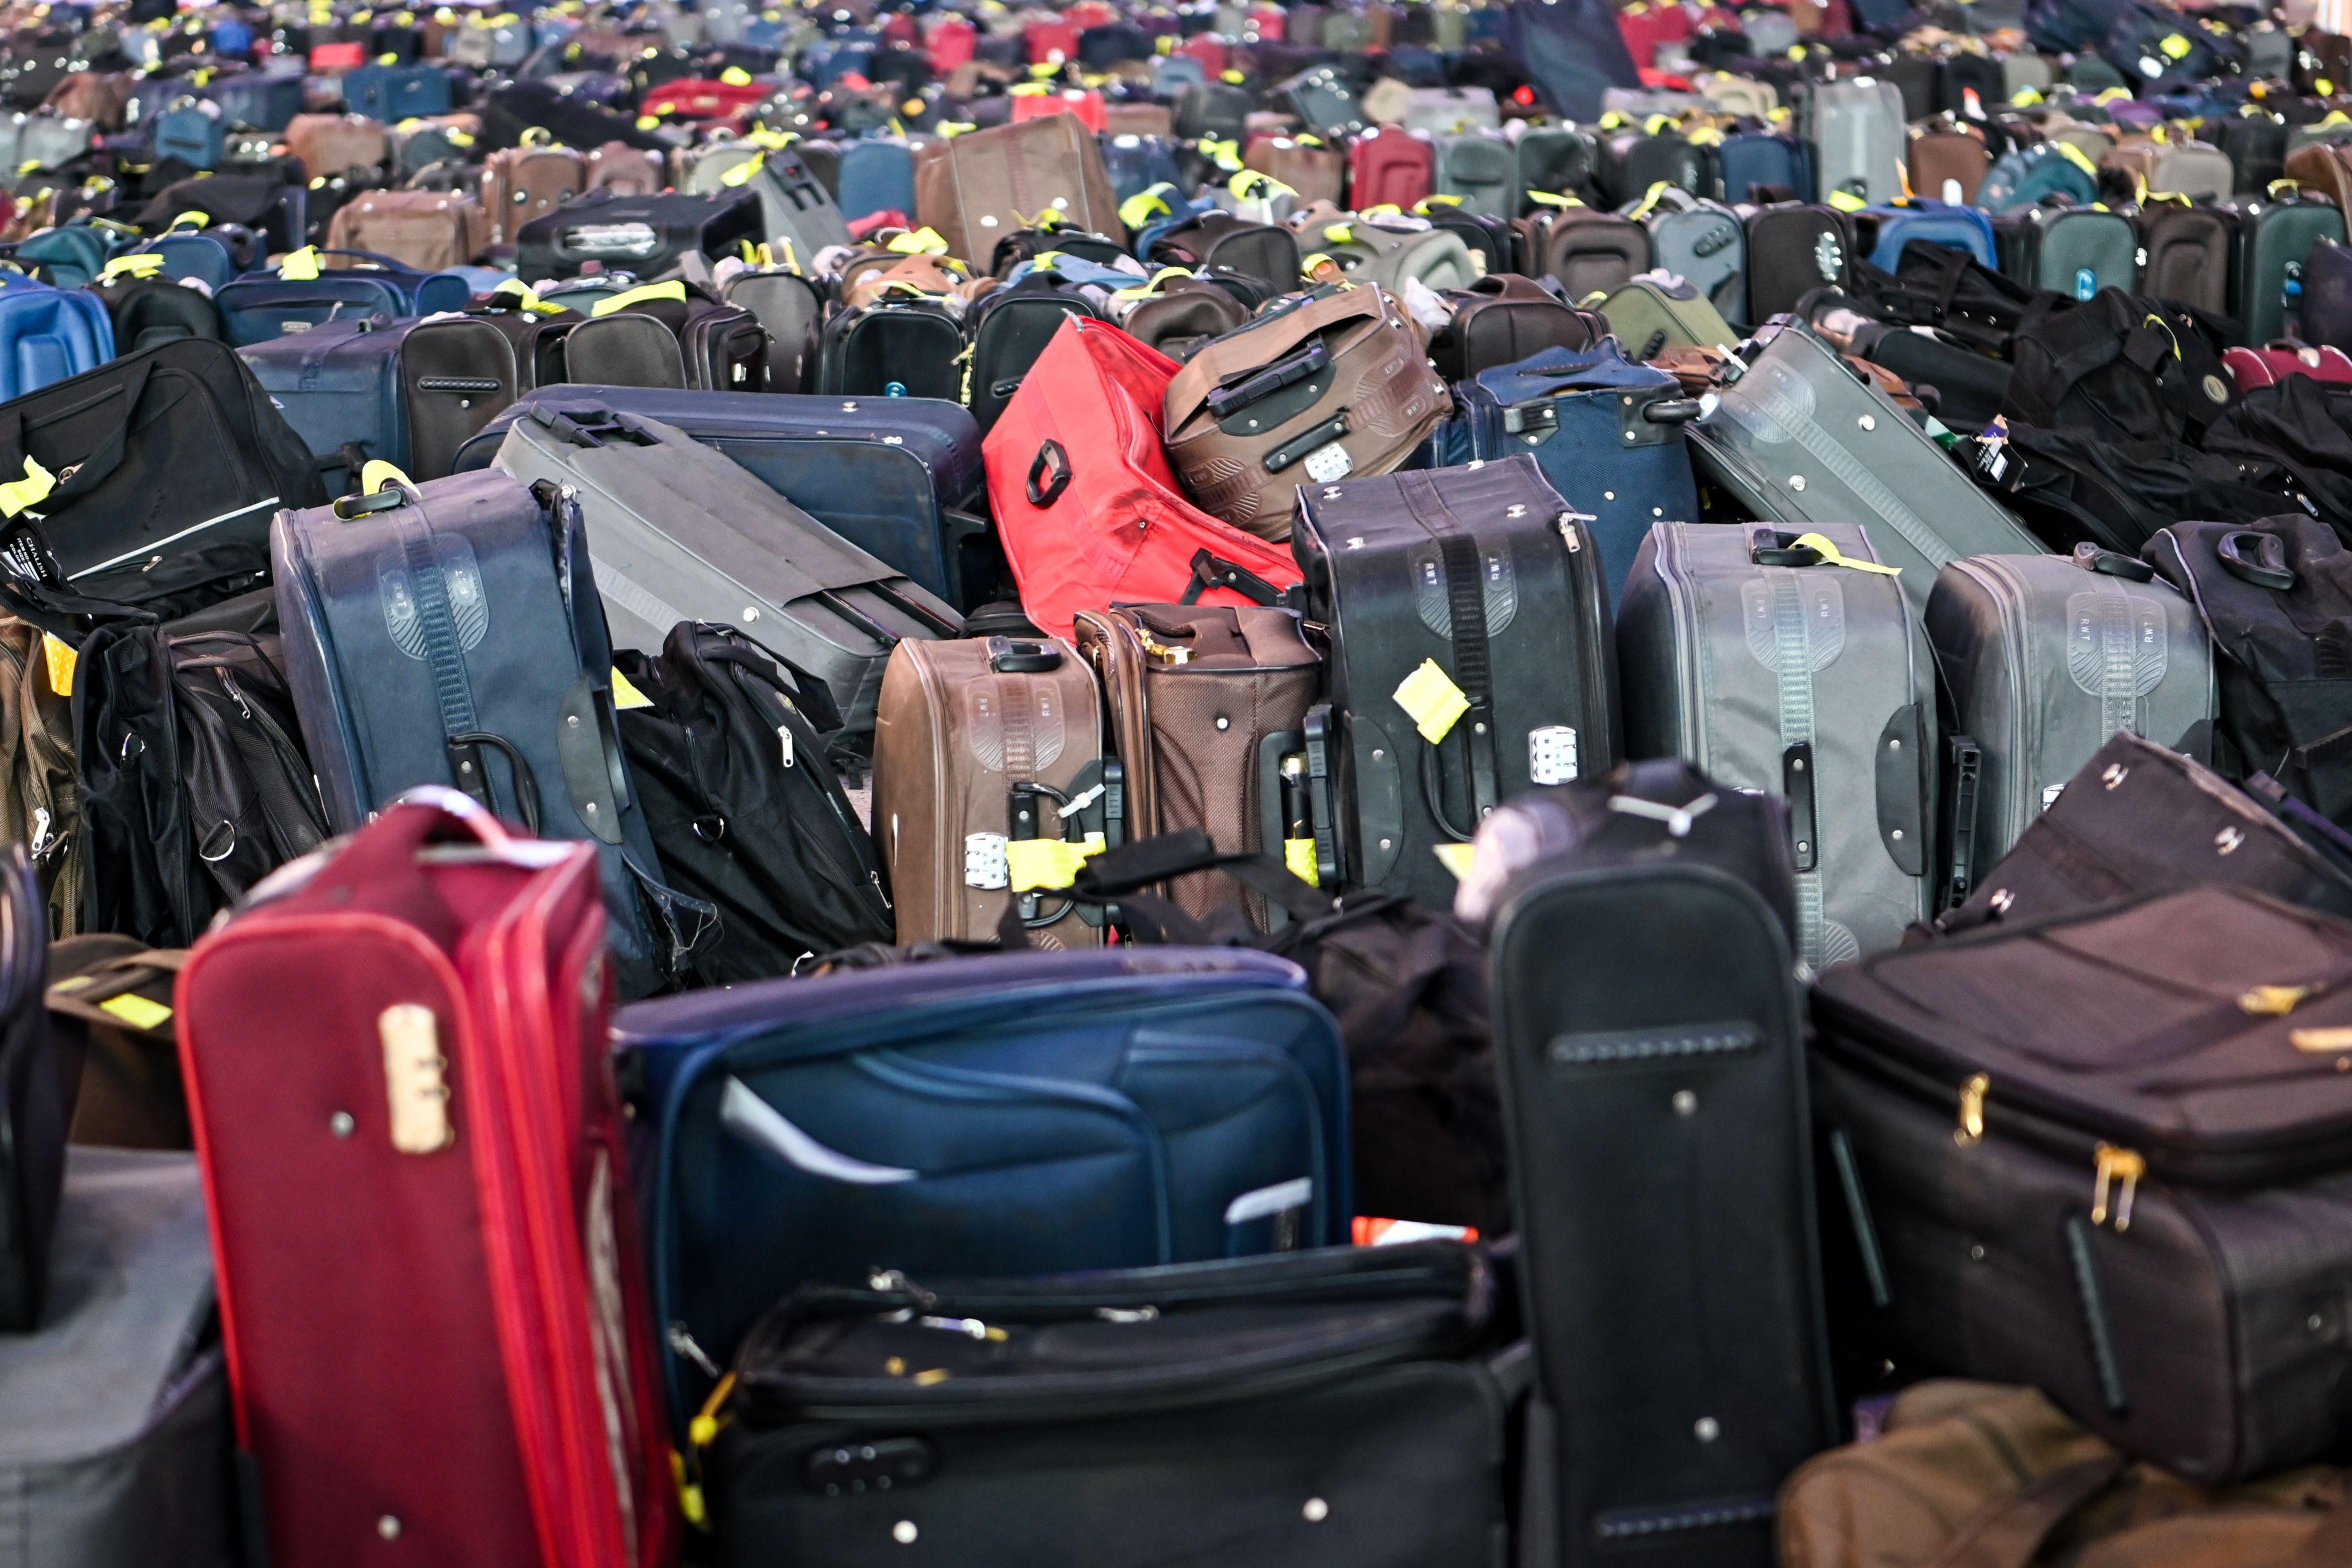 A large pile of suitcases